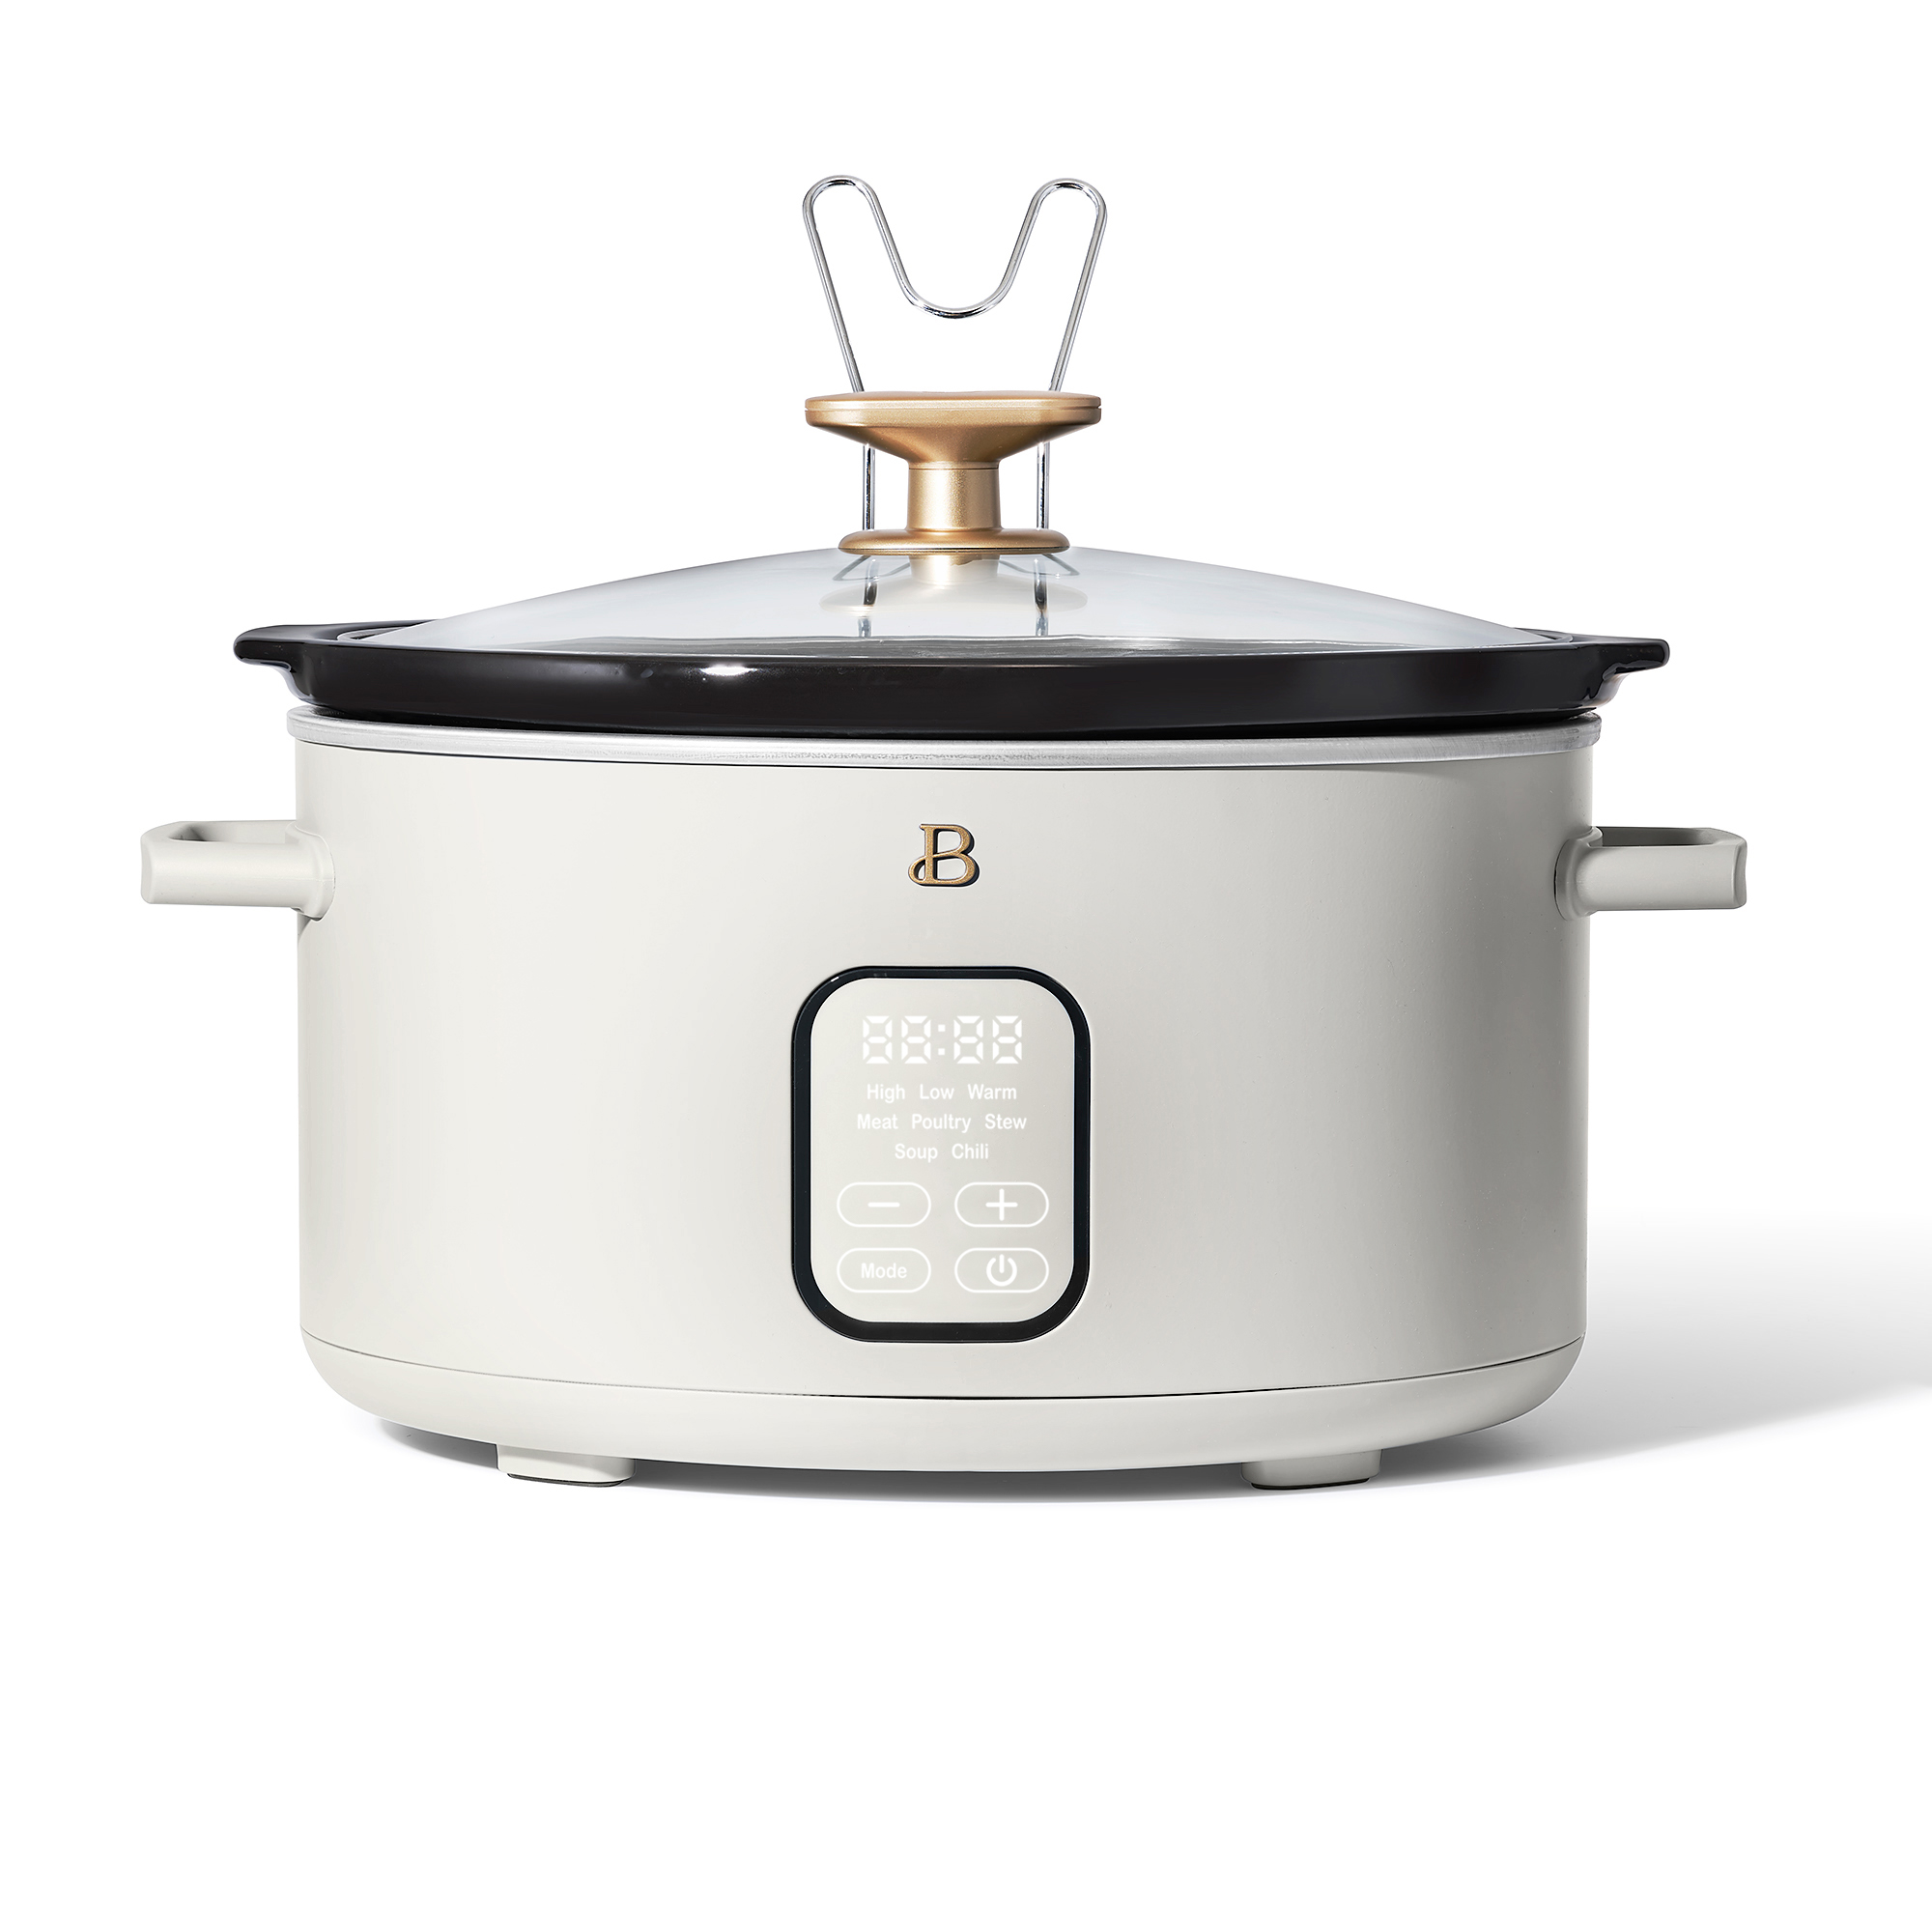 Beautiful 6 Qt Programmable Slow Cooker, White Icing by Drew Barrymore - image 1 of 12